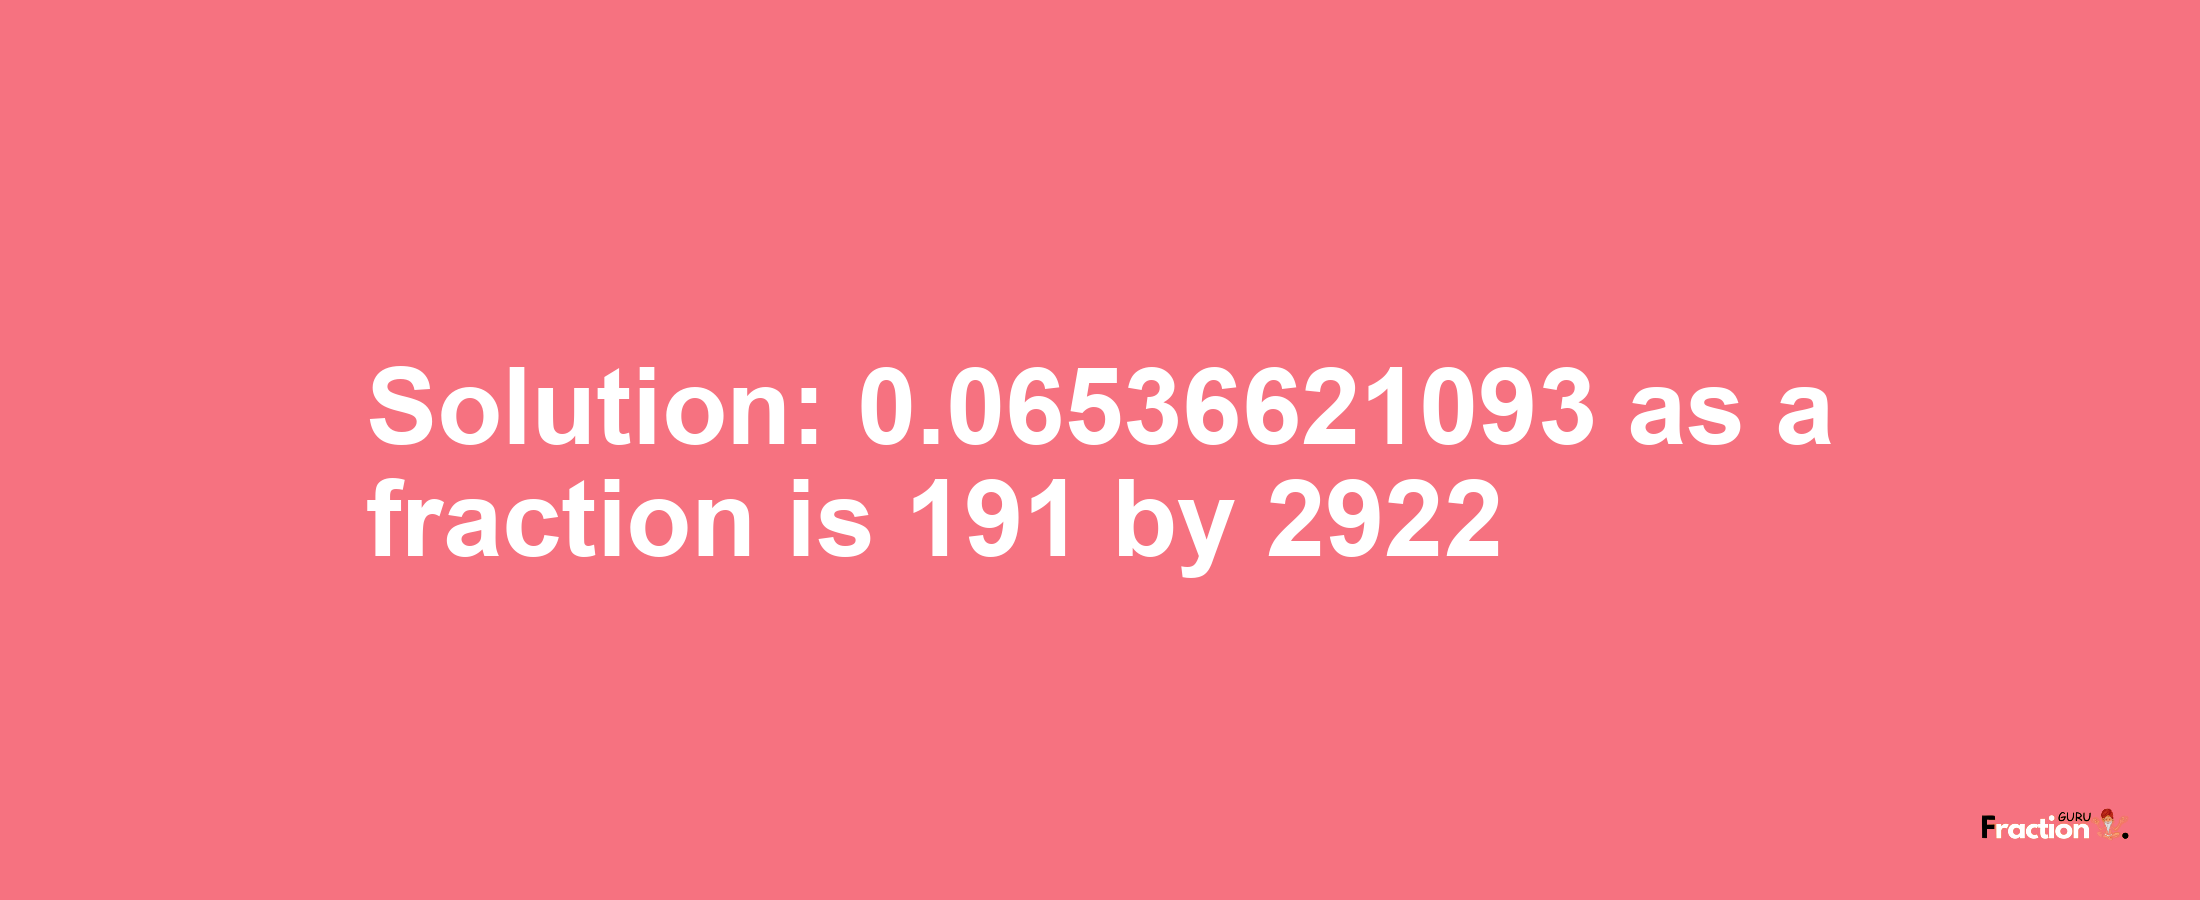 Solution:0.06536621093 as a fraction is 191/2922